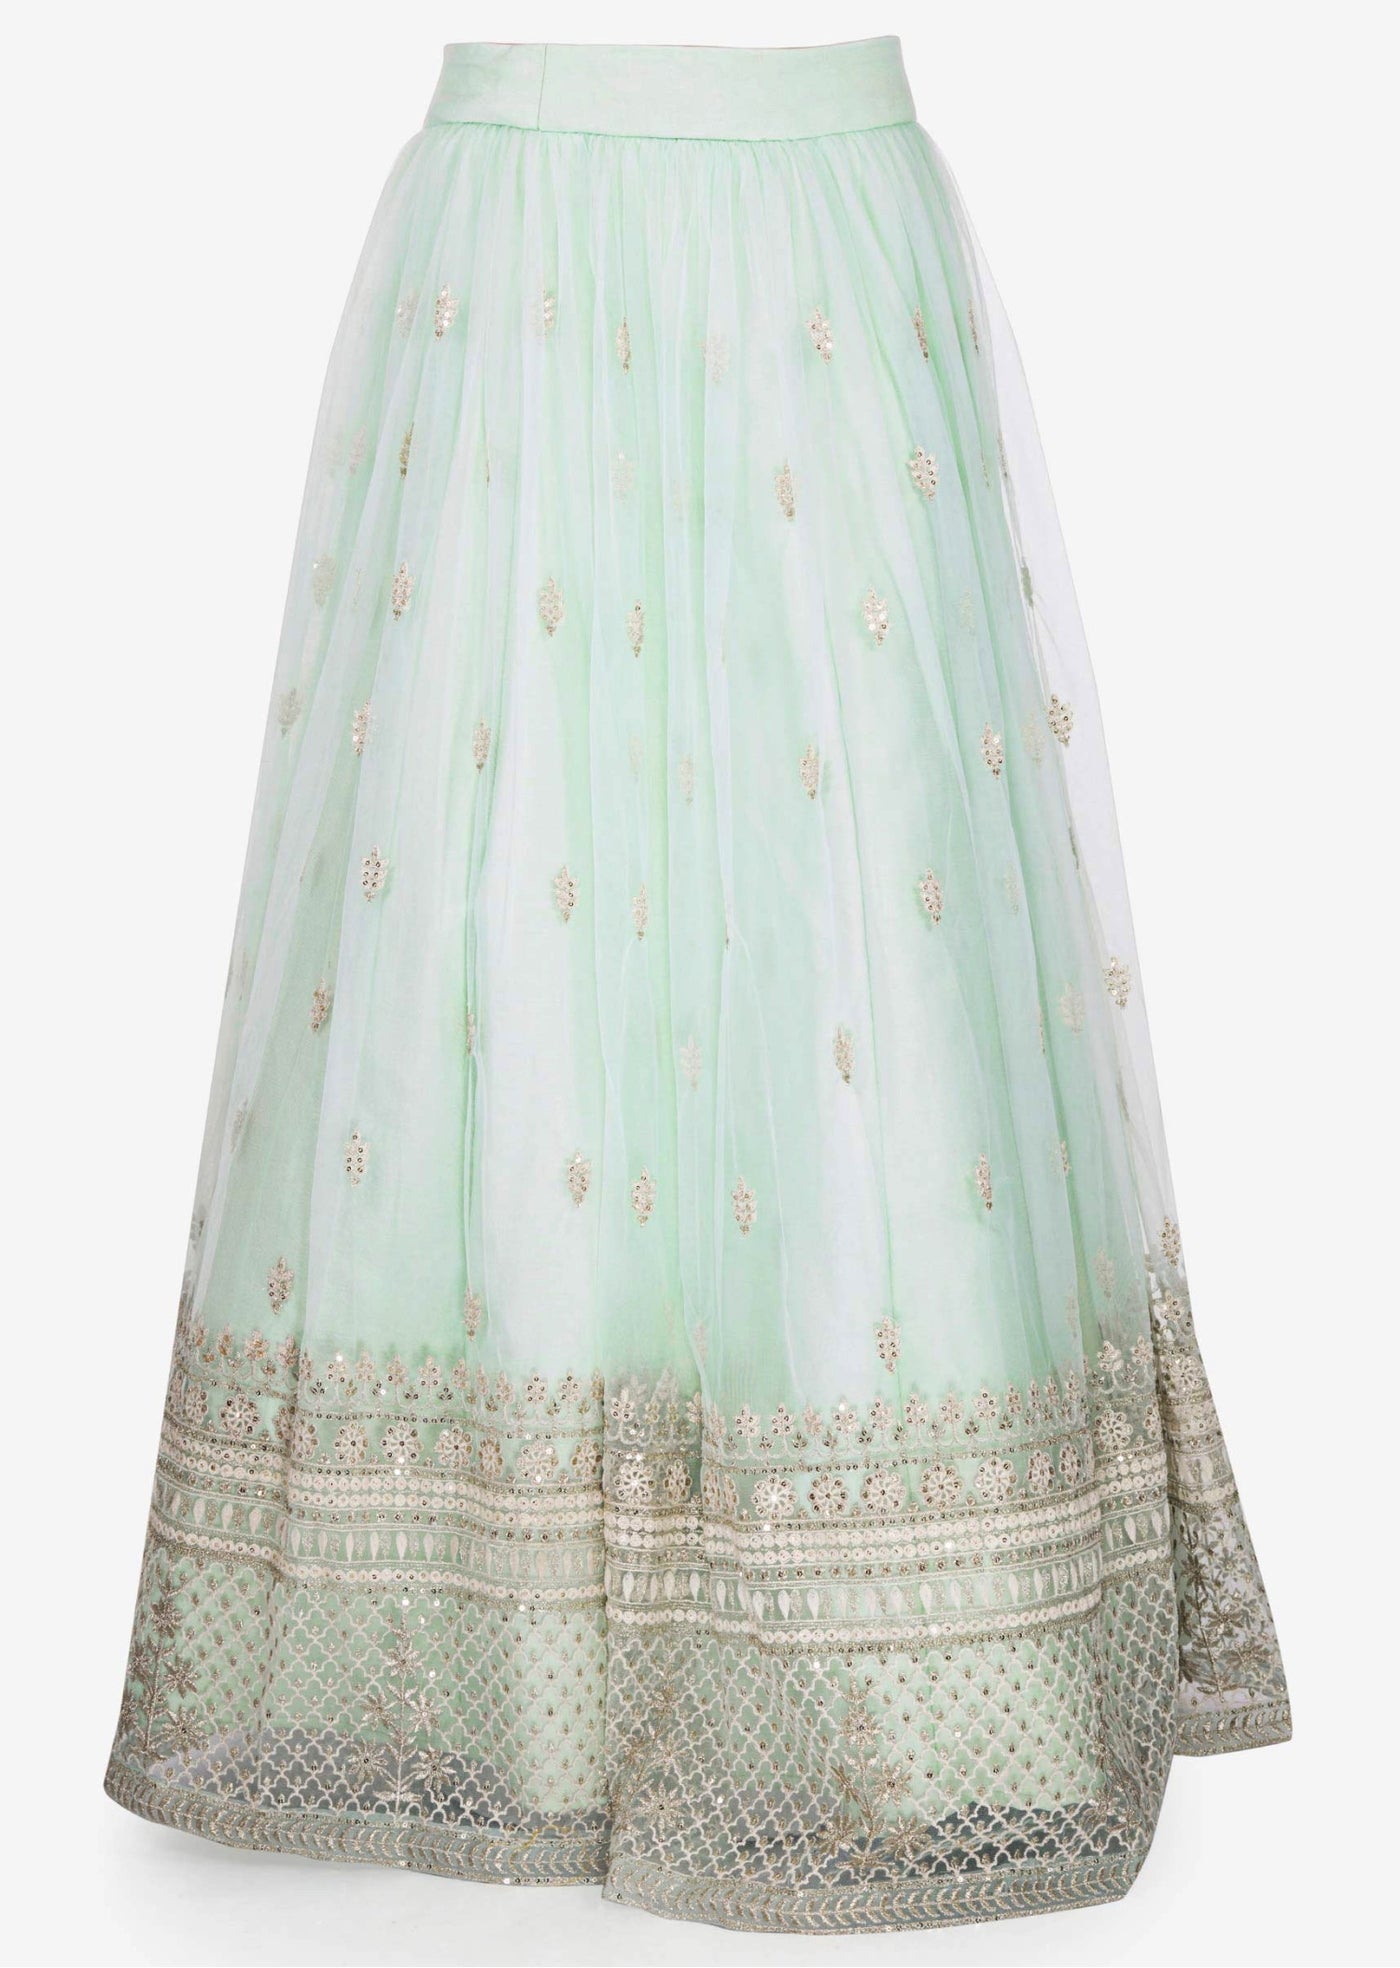 Mint blue lehenga with a orange brocade silk blouse embellished in thread work - Indian Clothing in Denver, CO, Aurora, CO, Boulder, CO, Fort Collins, CO, Colorado Springs, CO, Parker, CO, Highlands Ranch, CO, Cherry Creek, CO, Centennial, CO, and Longmont, CO. Nationwide shipping USA - India Fashion X